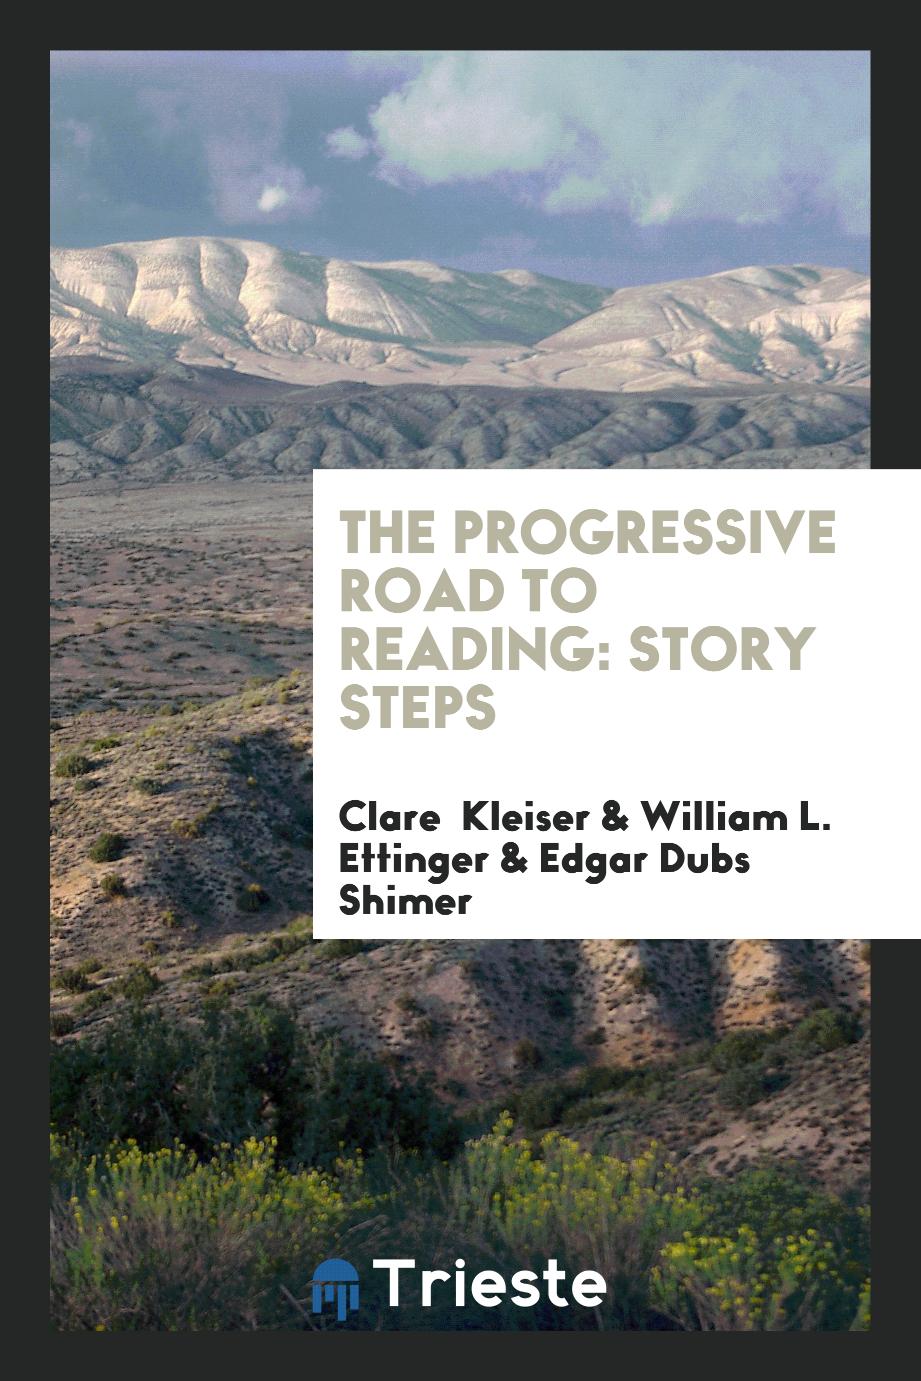 The Progressive Road to Reading: Story Steps